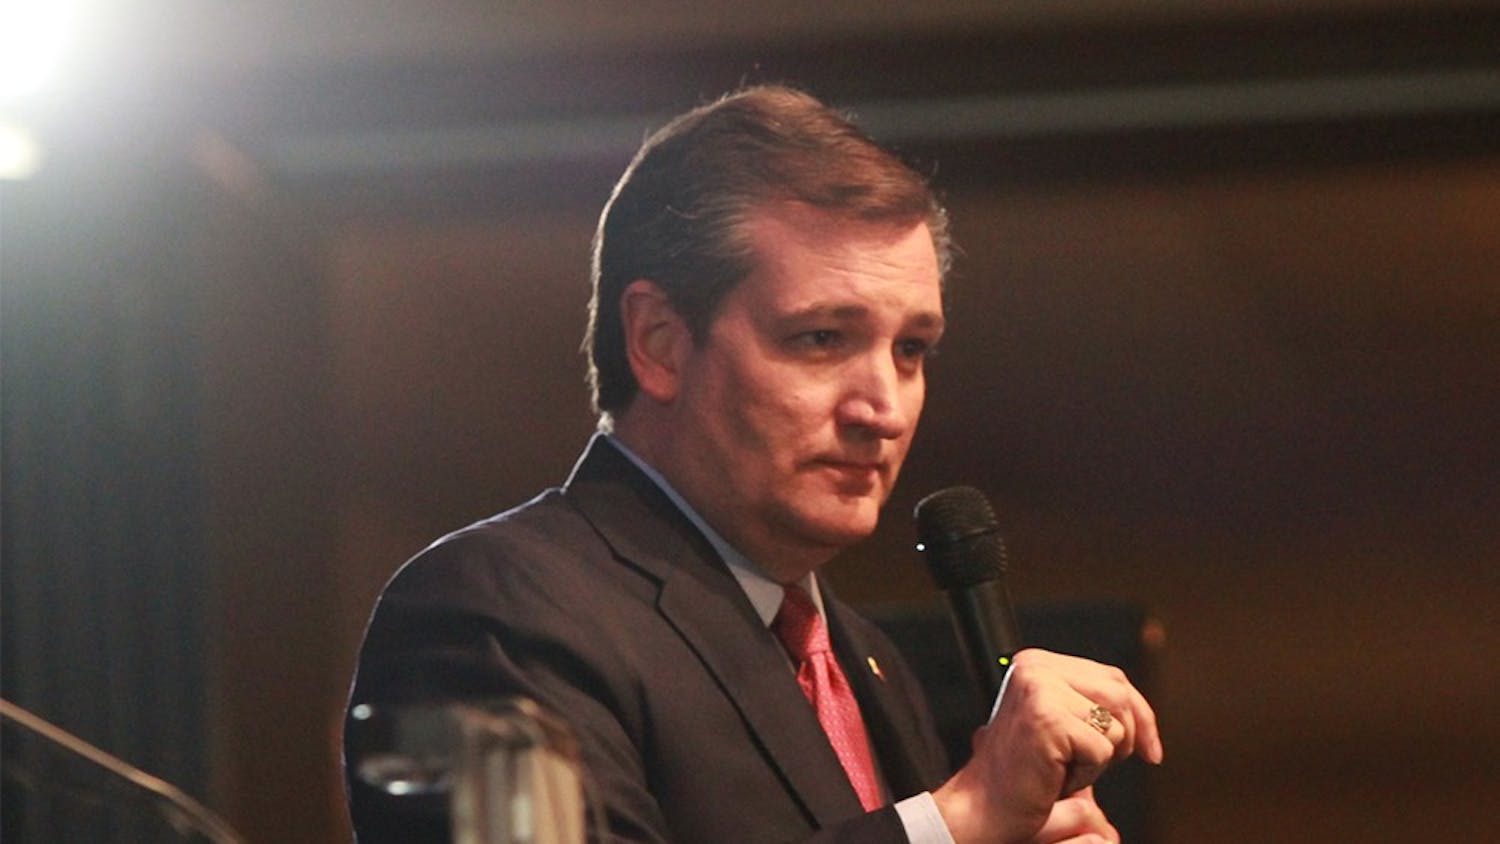 Presidential candidate Sen. Ted Cruz addresses a sold-out crowd at the Indiana Republican Spring Dinner Thursday at the Primo's Banquet Center.